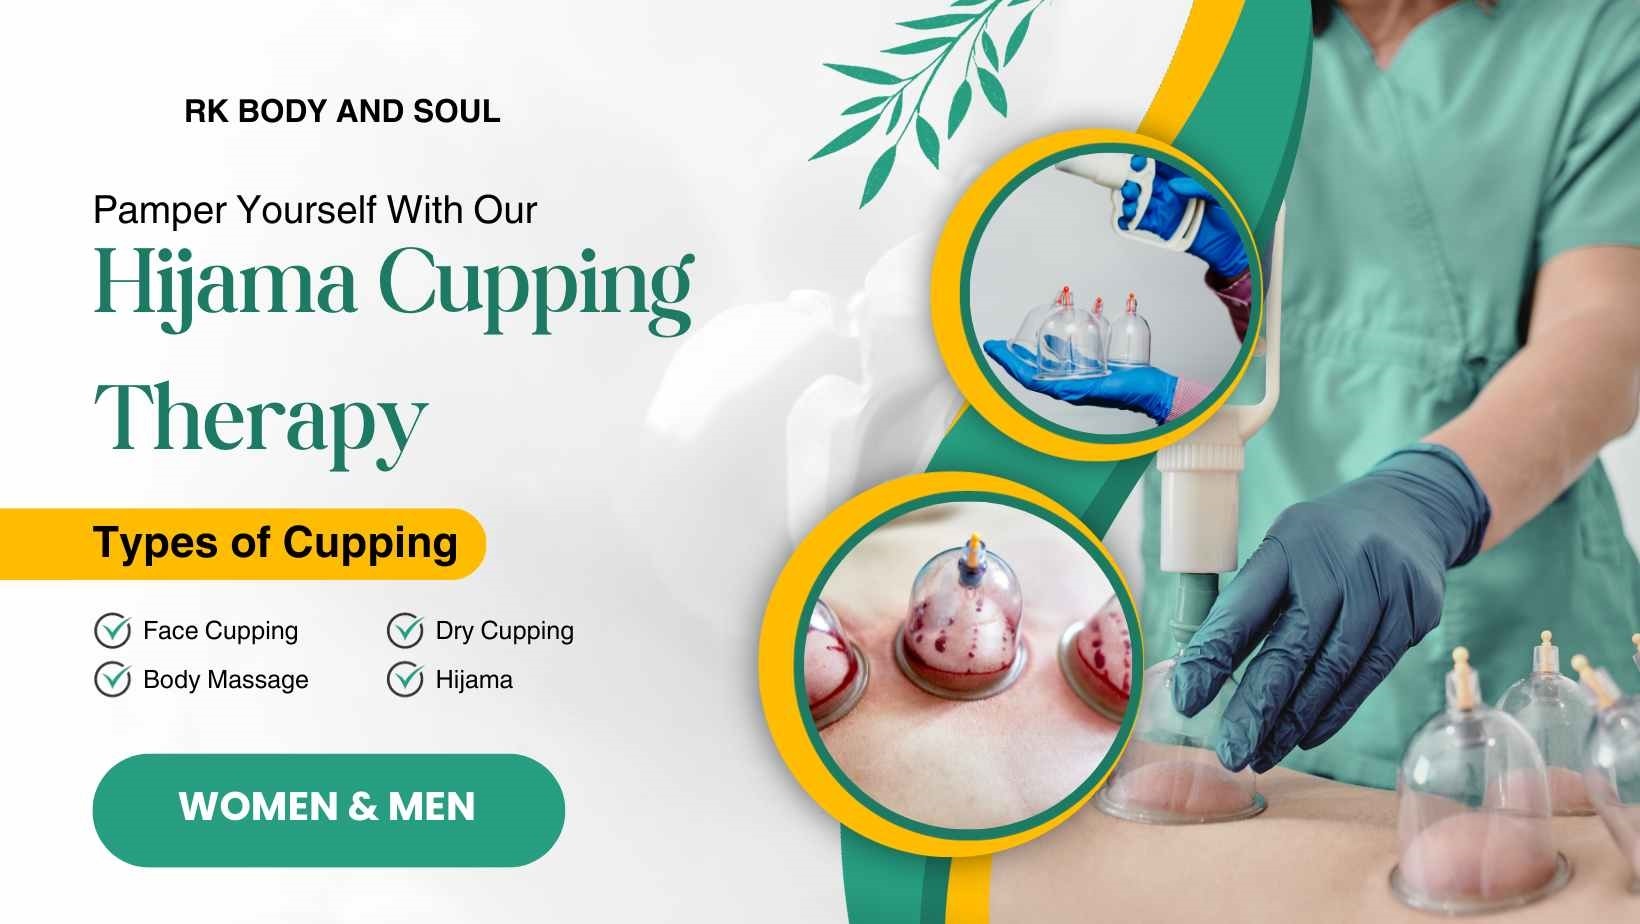 RK BODY AND SOUL

Pamper Yourself With Our

Hijama Cupping
Therapy

Types of Cupping
© Face Cupping © Dry Cupping
© Body Massage © Hijama